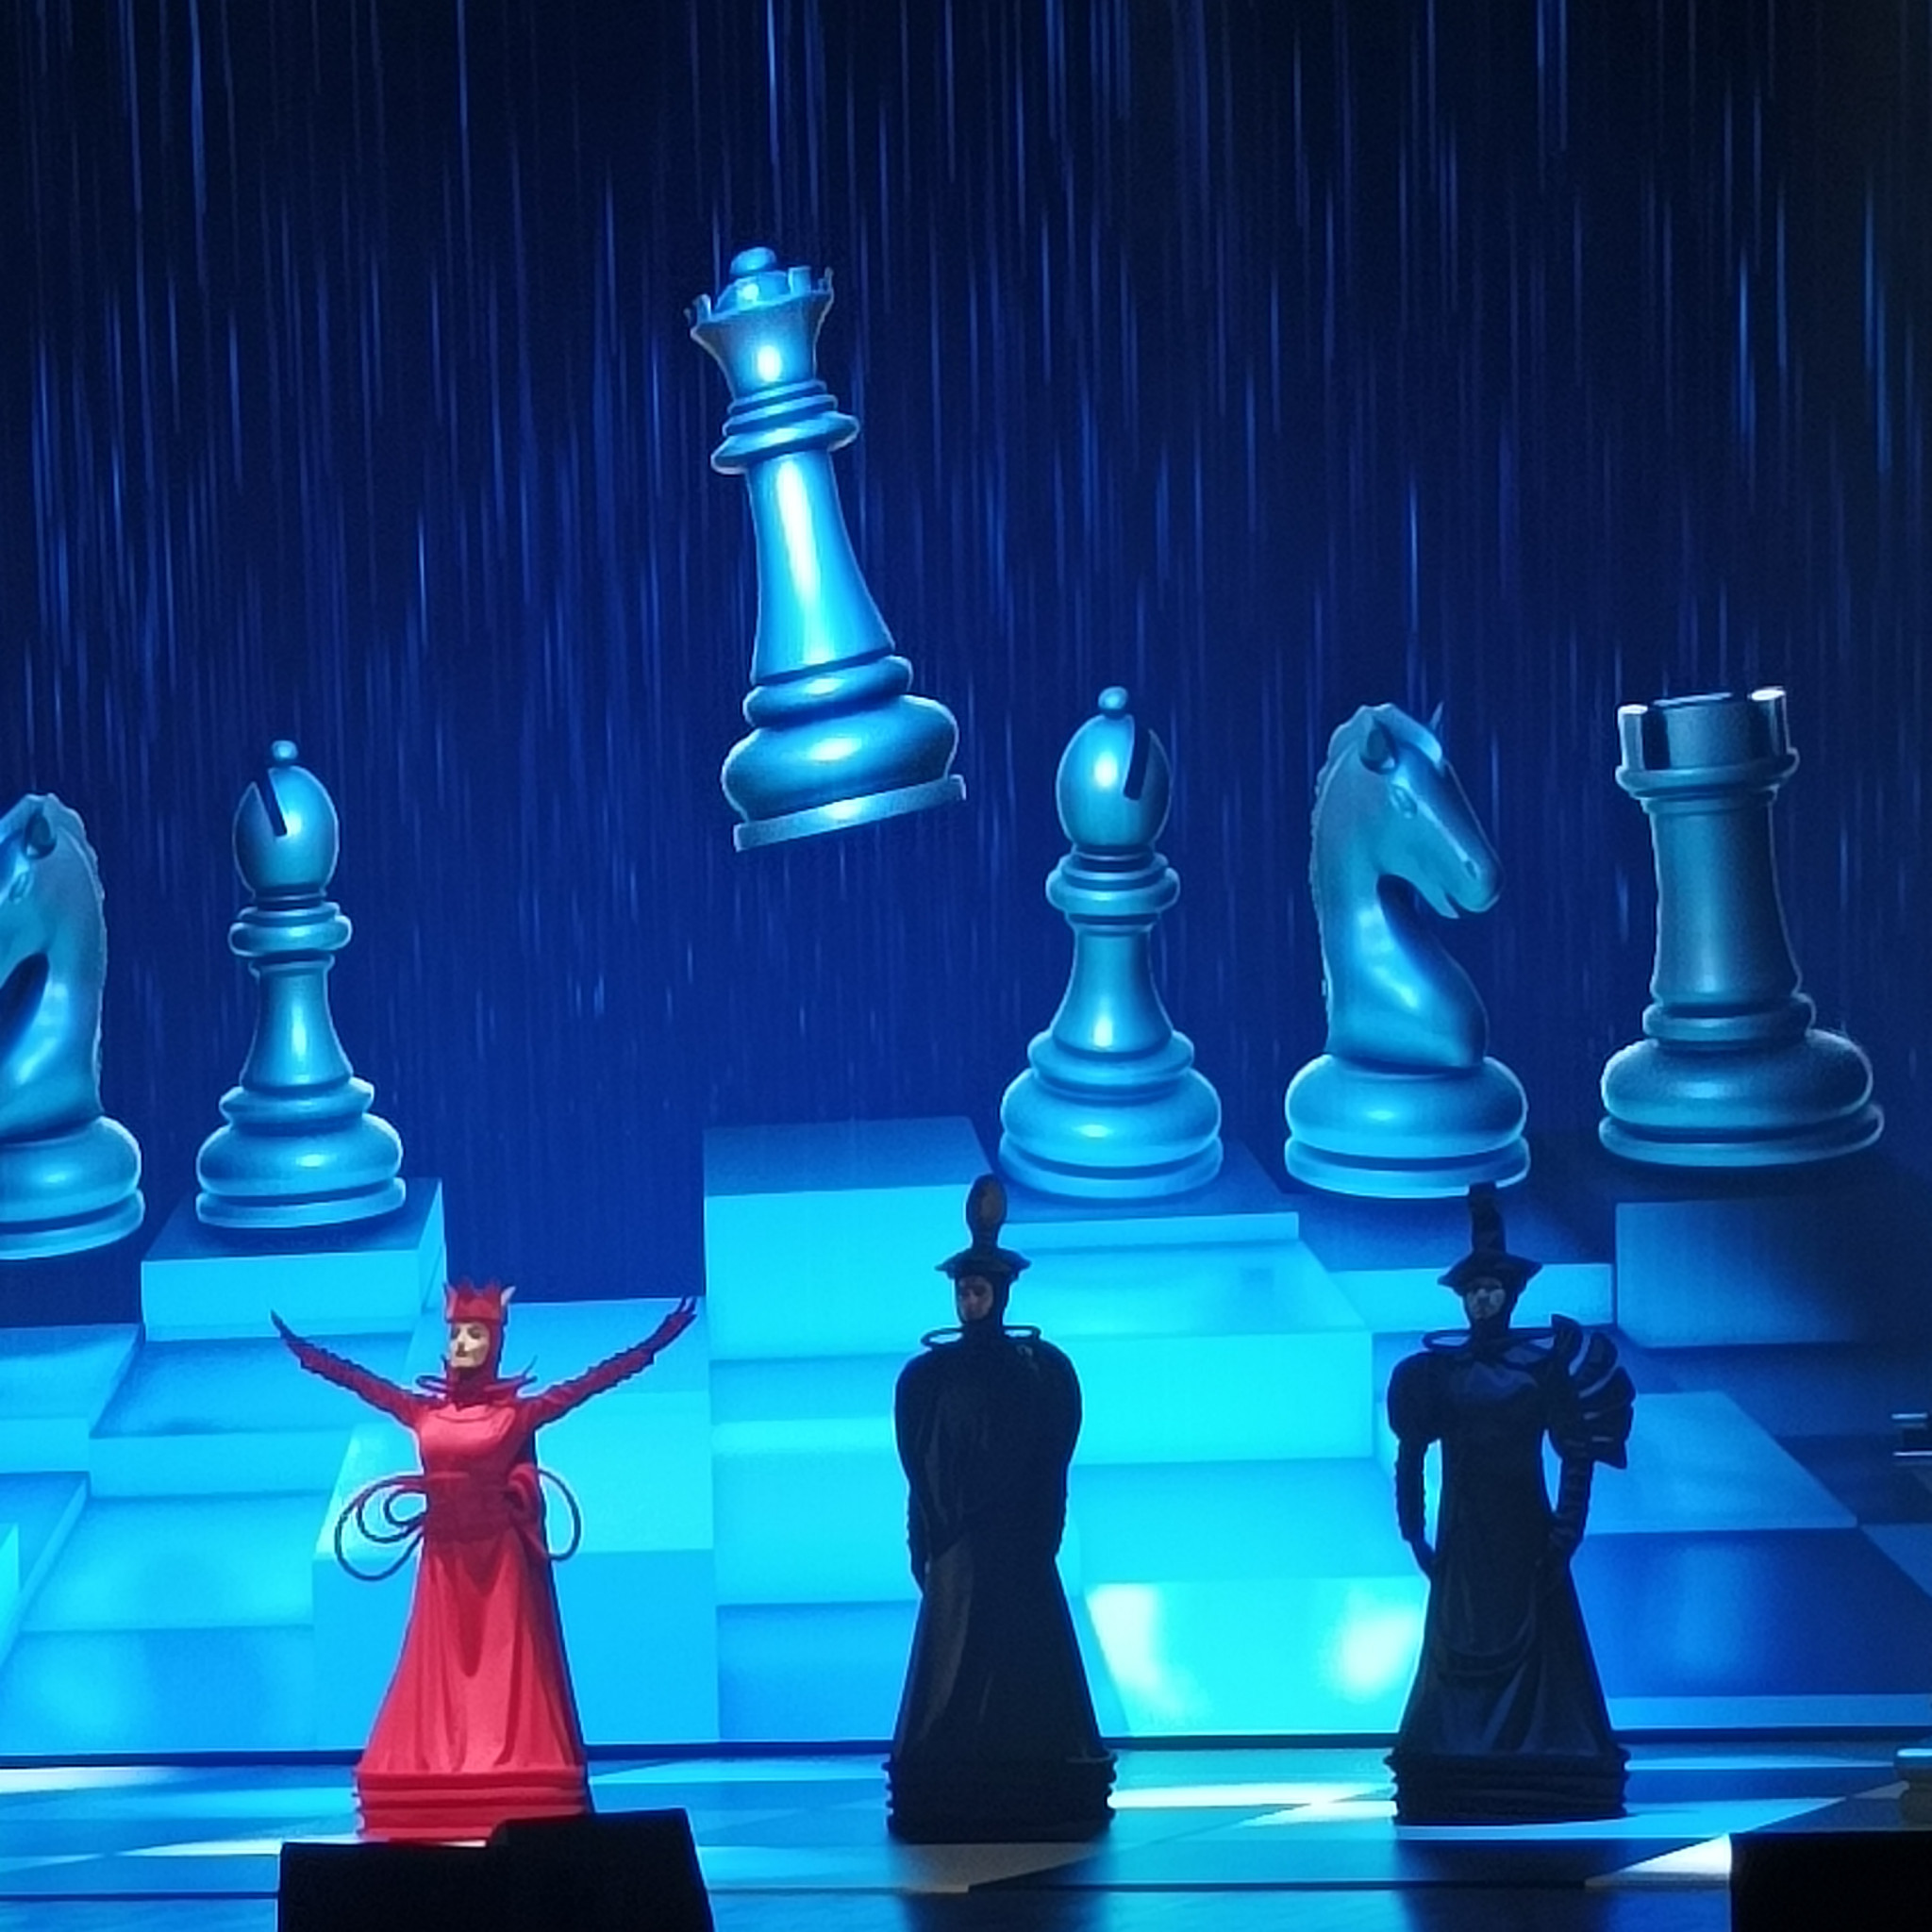 Virtual chess pieces form a backdrop for the Red Queen during a dance performance at FIDE World Cup Opening Ceremony in Baku ©ITG